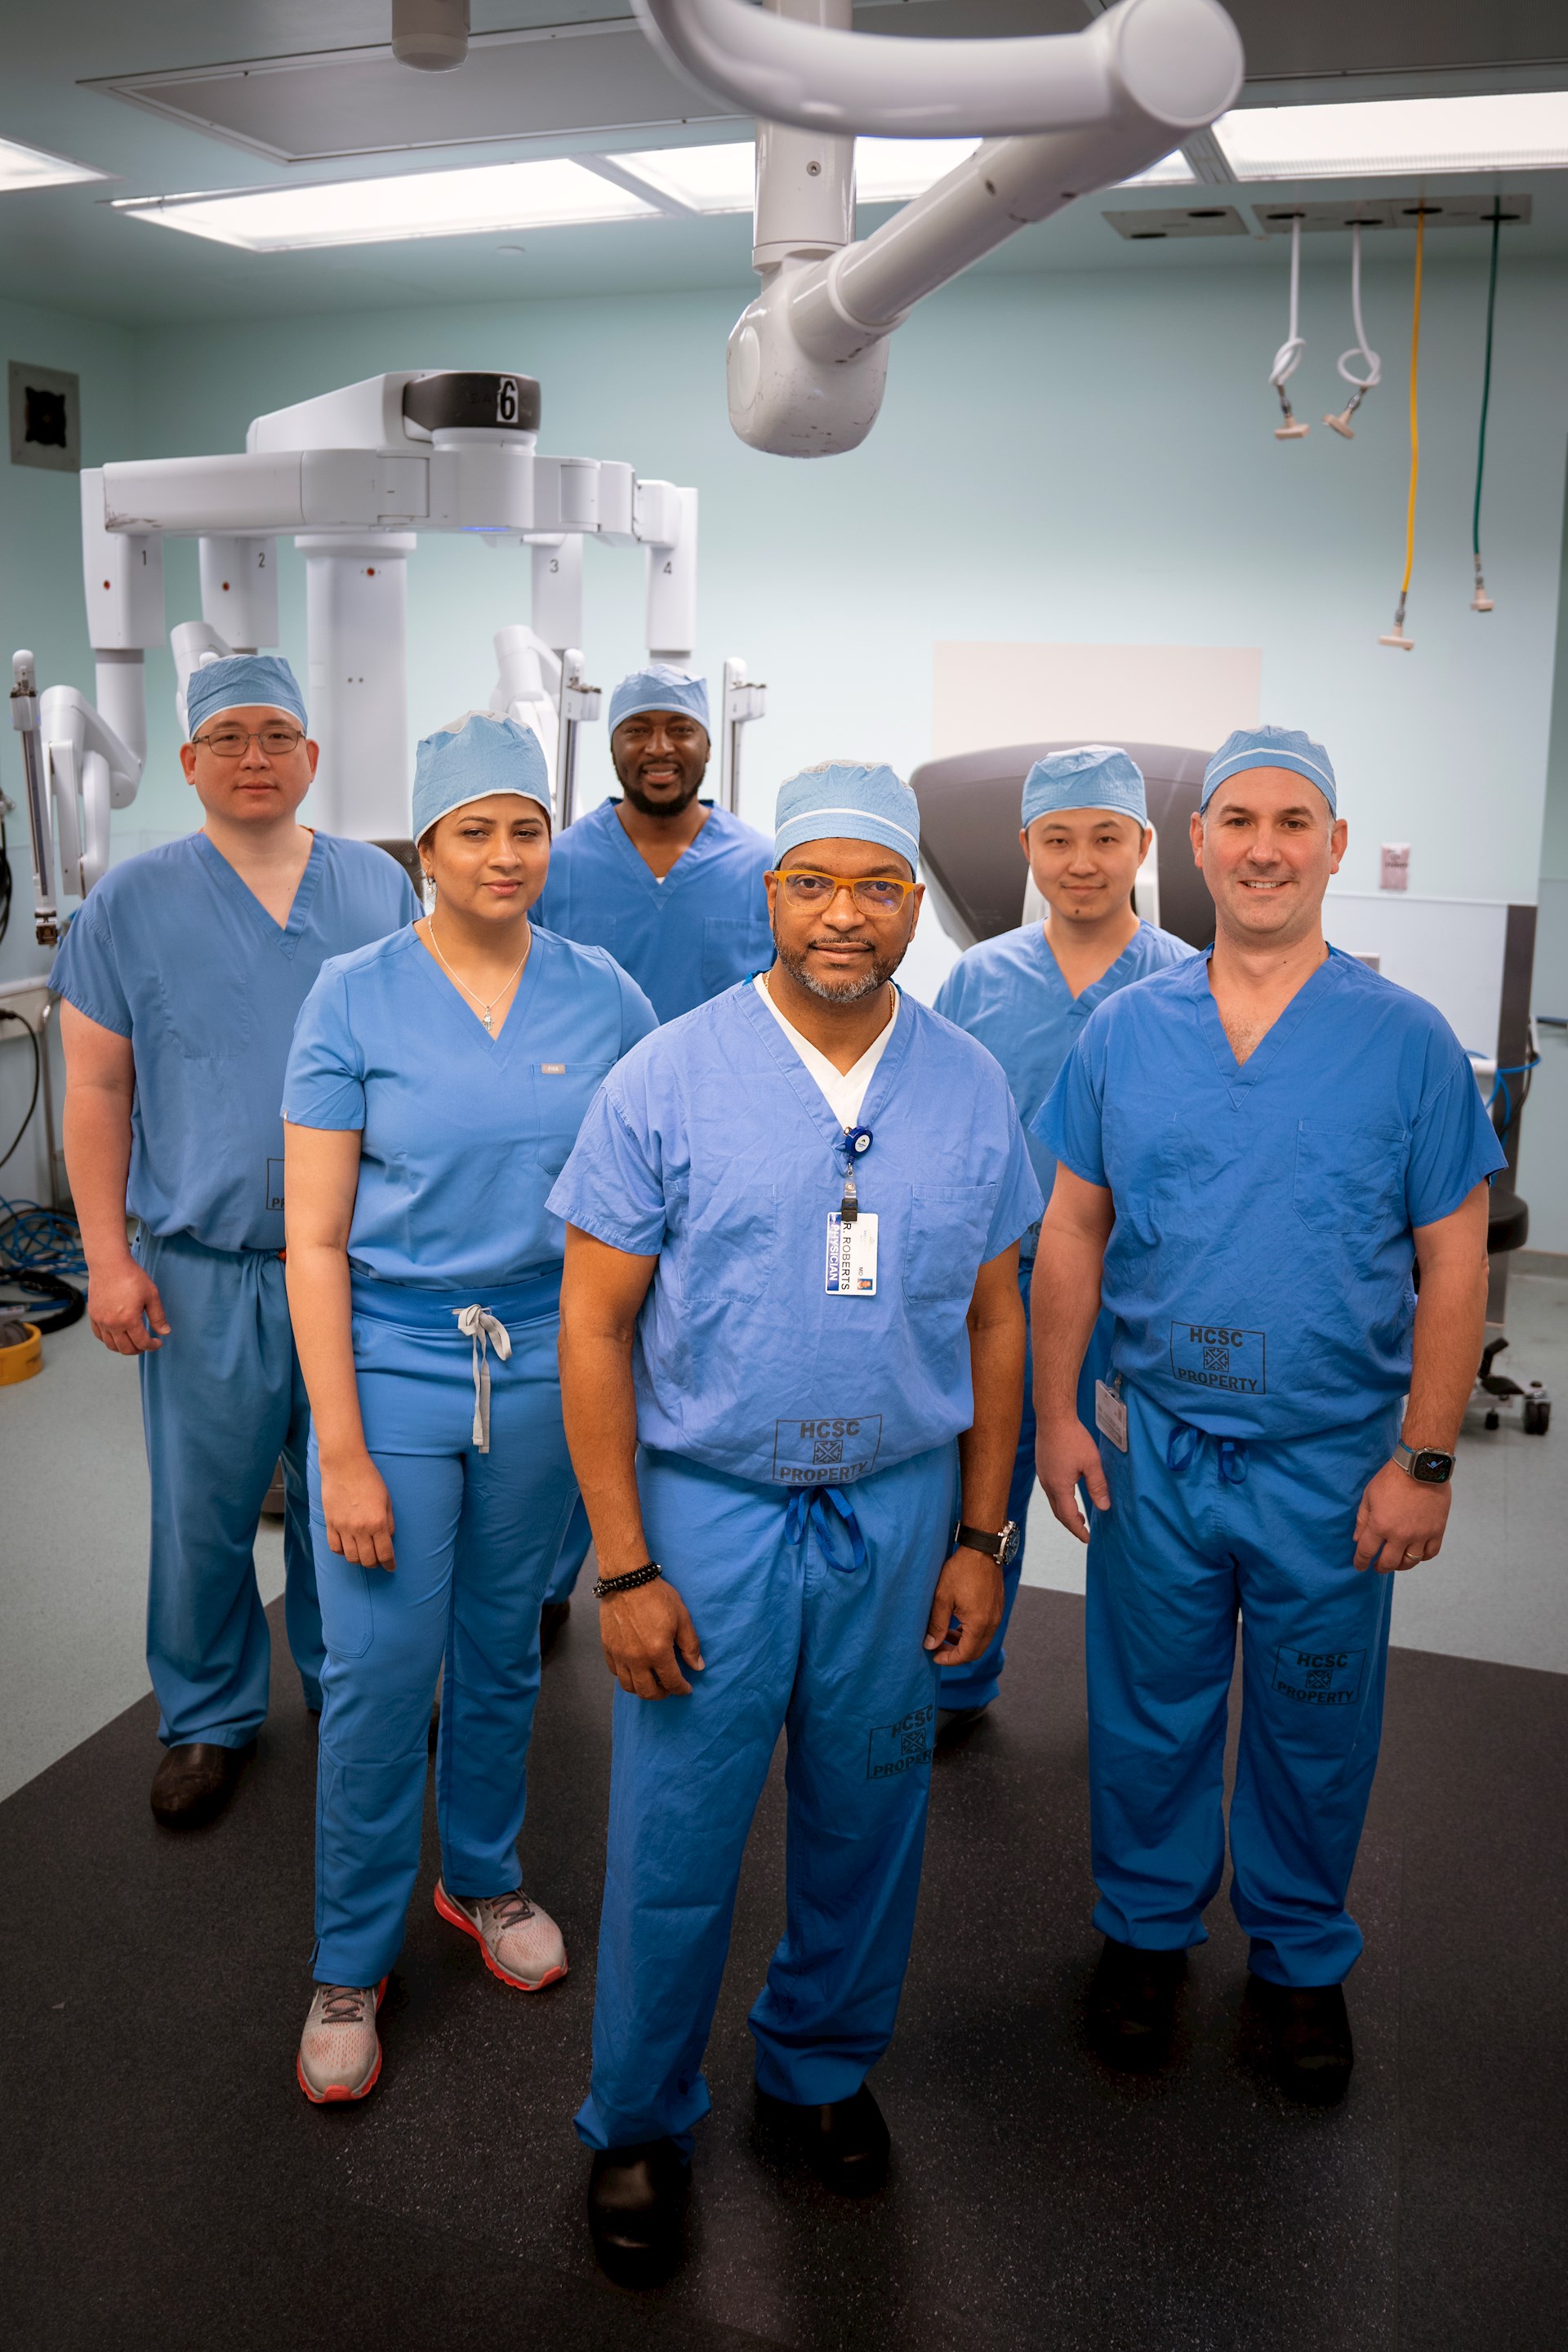 The six WellSpan surgeons who received the robotic Master Surgeon designation are (from left to right) Dr. Ricardo Patton U Po, Dr. Faiz Shariff, Dr. Benjamin Vabi, Dr. Carlos Roberts, Dr. Eav Lim, and Dr. Scott Tiedebohl.